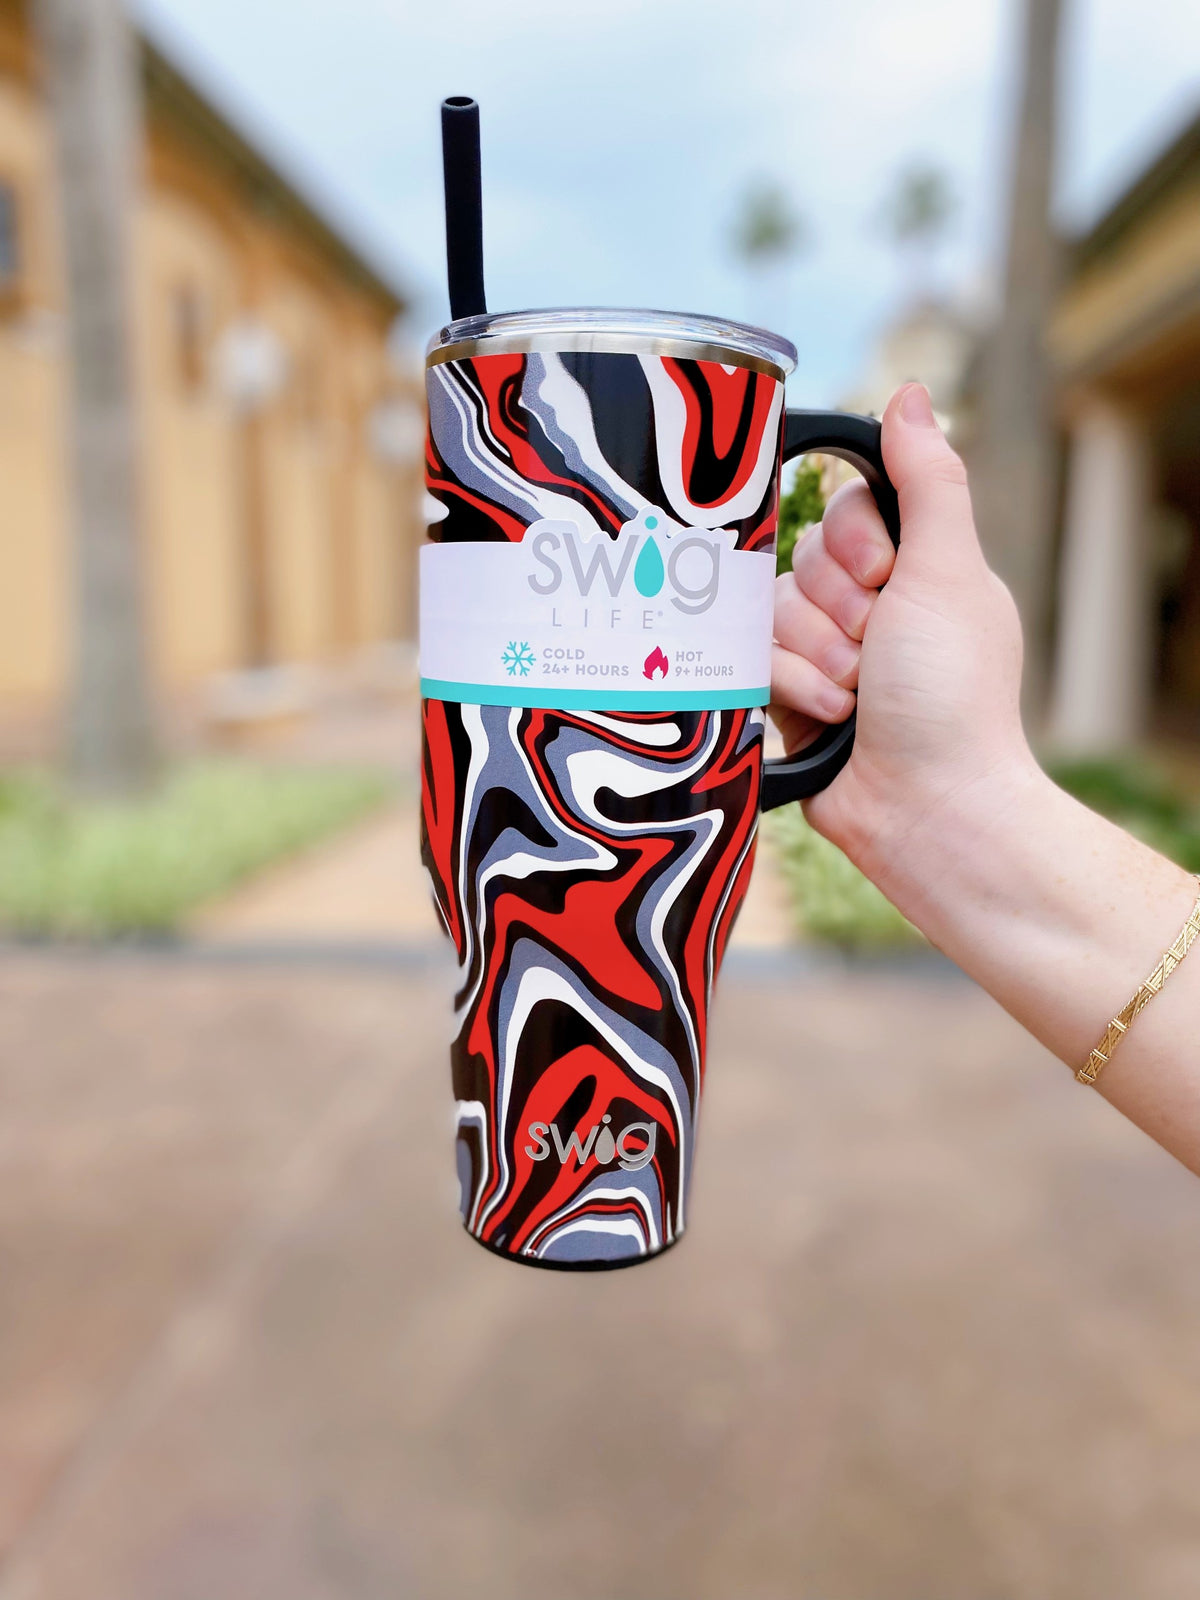 https://www.shopcarolineandco.shop/wp-content/uploads/1692/97/explore-our-collection-of-swig-40-oz-mega-mug-fanzone-black-red-swig-to-achieve-the-best-you-can-be_0.jpg